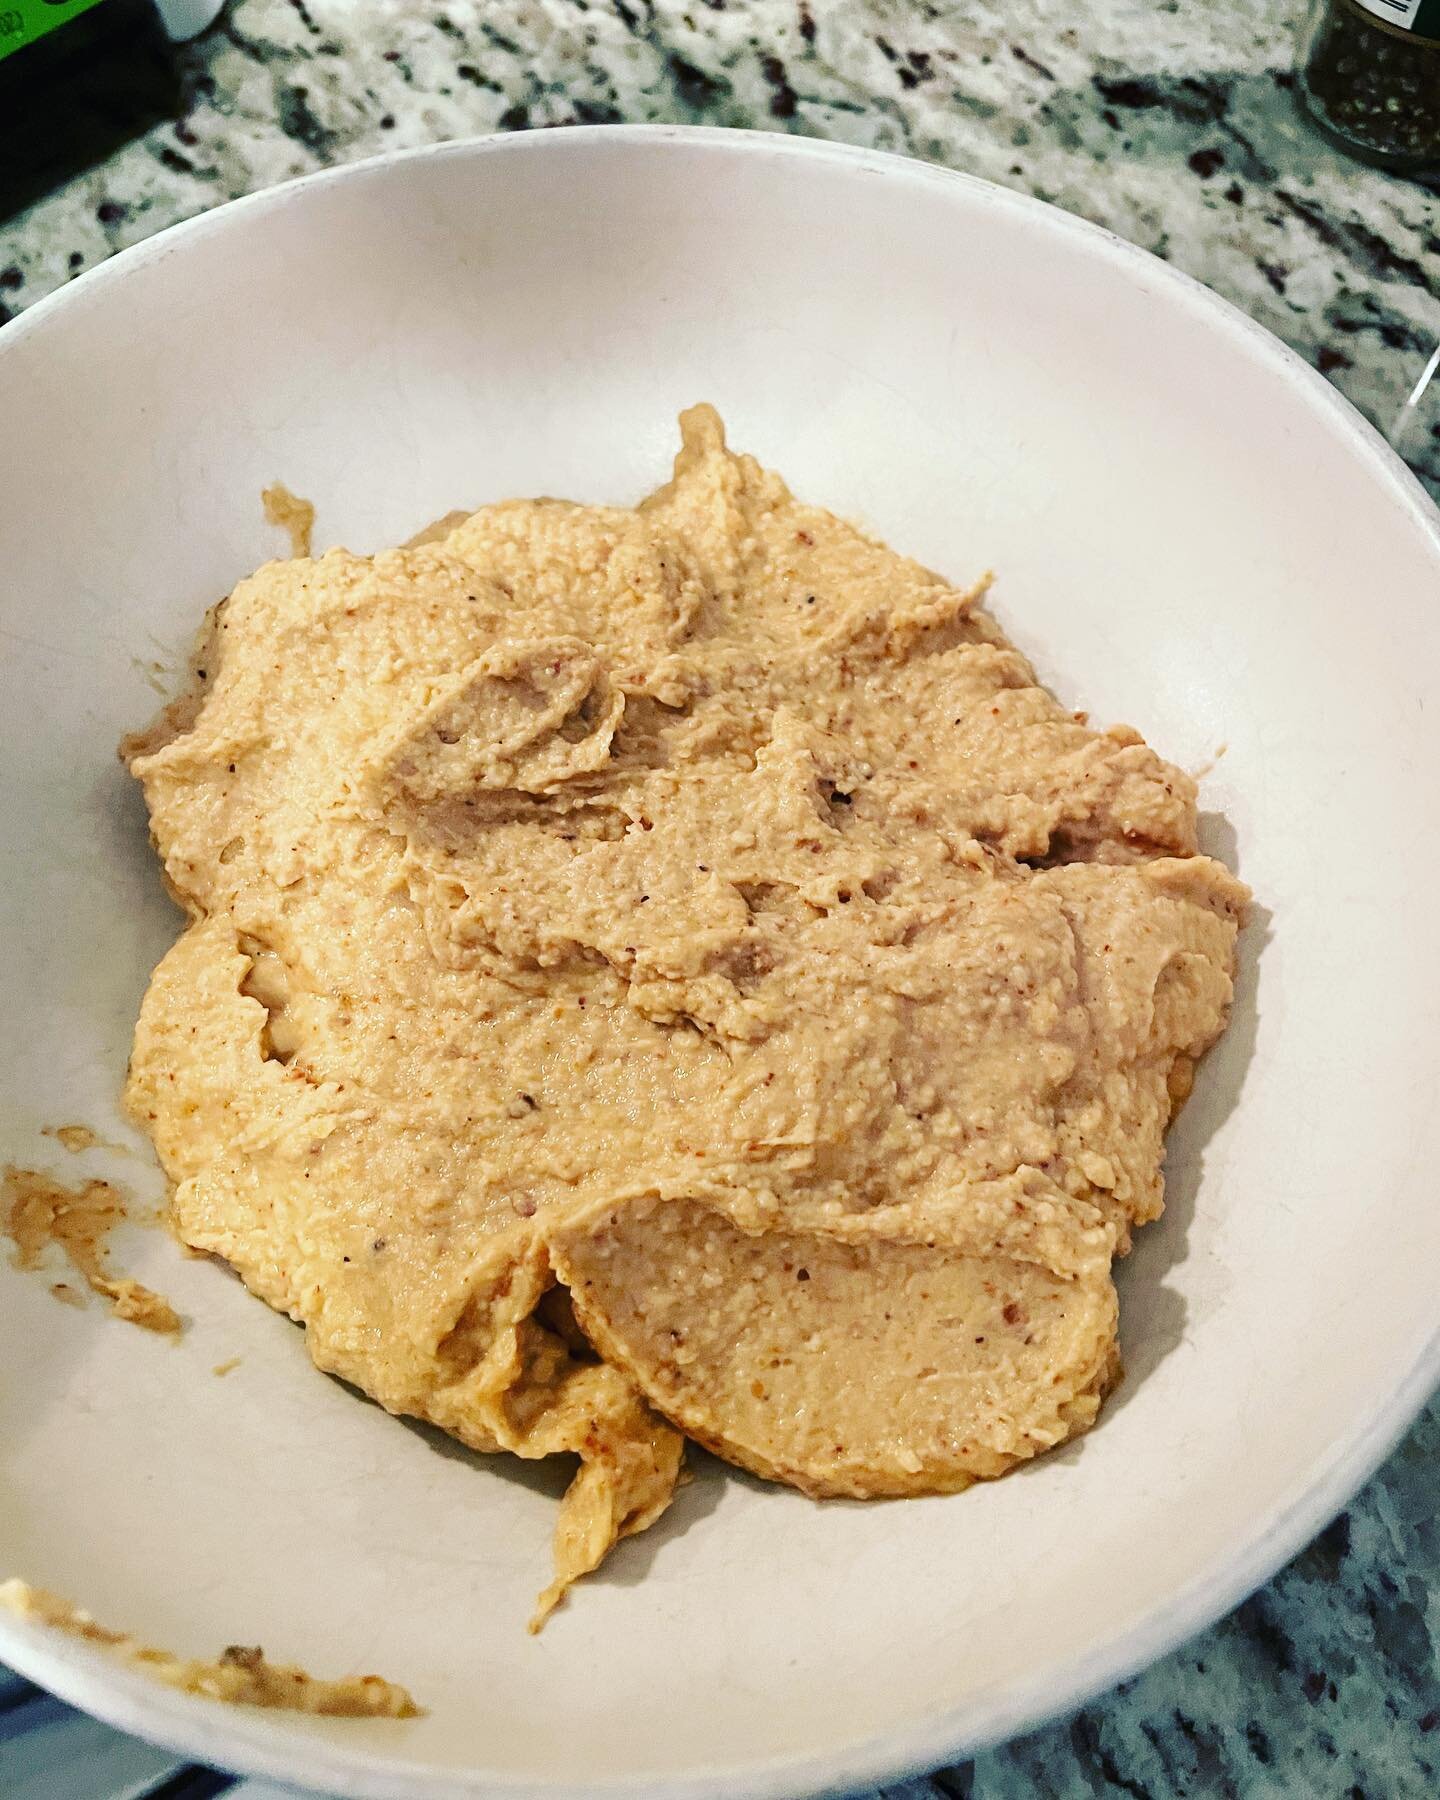 First attempt at homemade hummus! It&rsquo;s really good! Had a slight fail at the tahini but it all worked out lol 🤪
#homemade #fun #hobby #creativeoutlet #hummus #actorslife #margiemoments